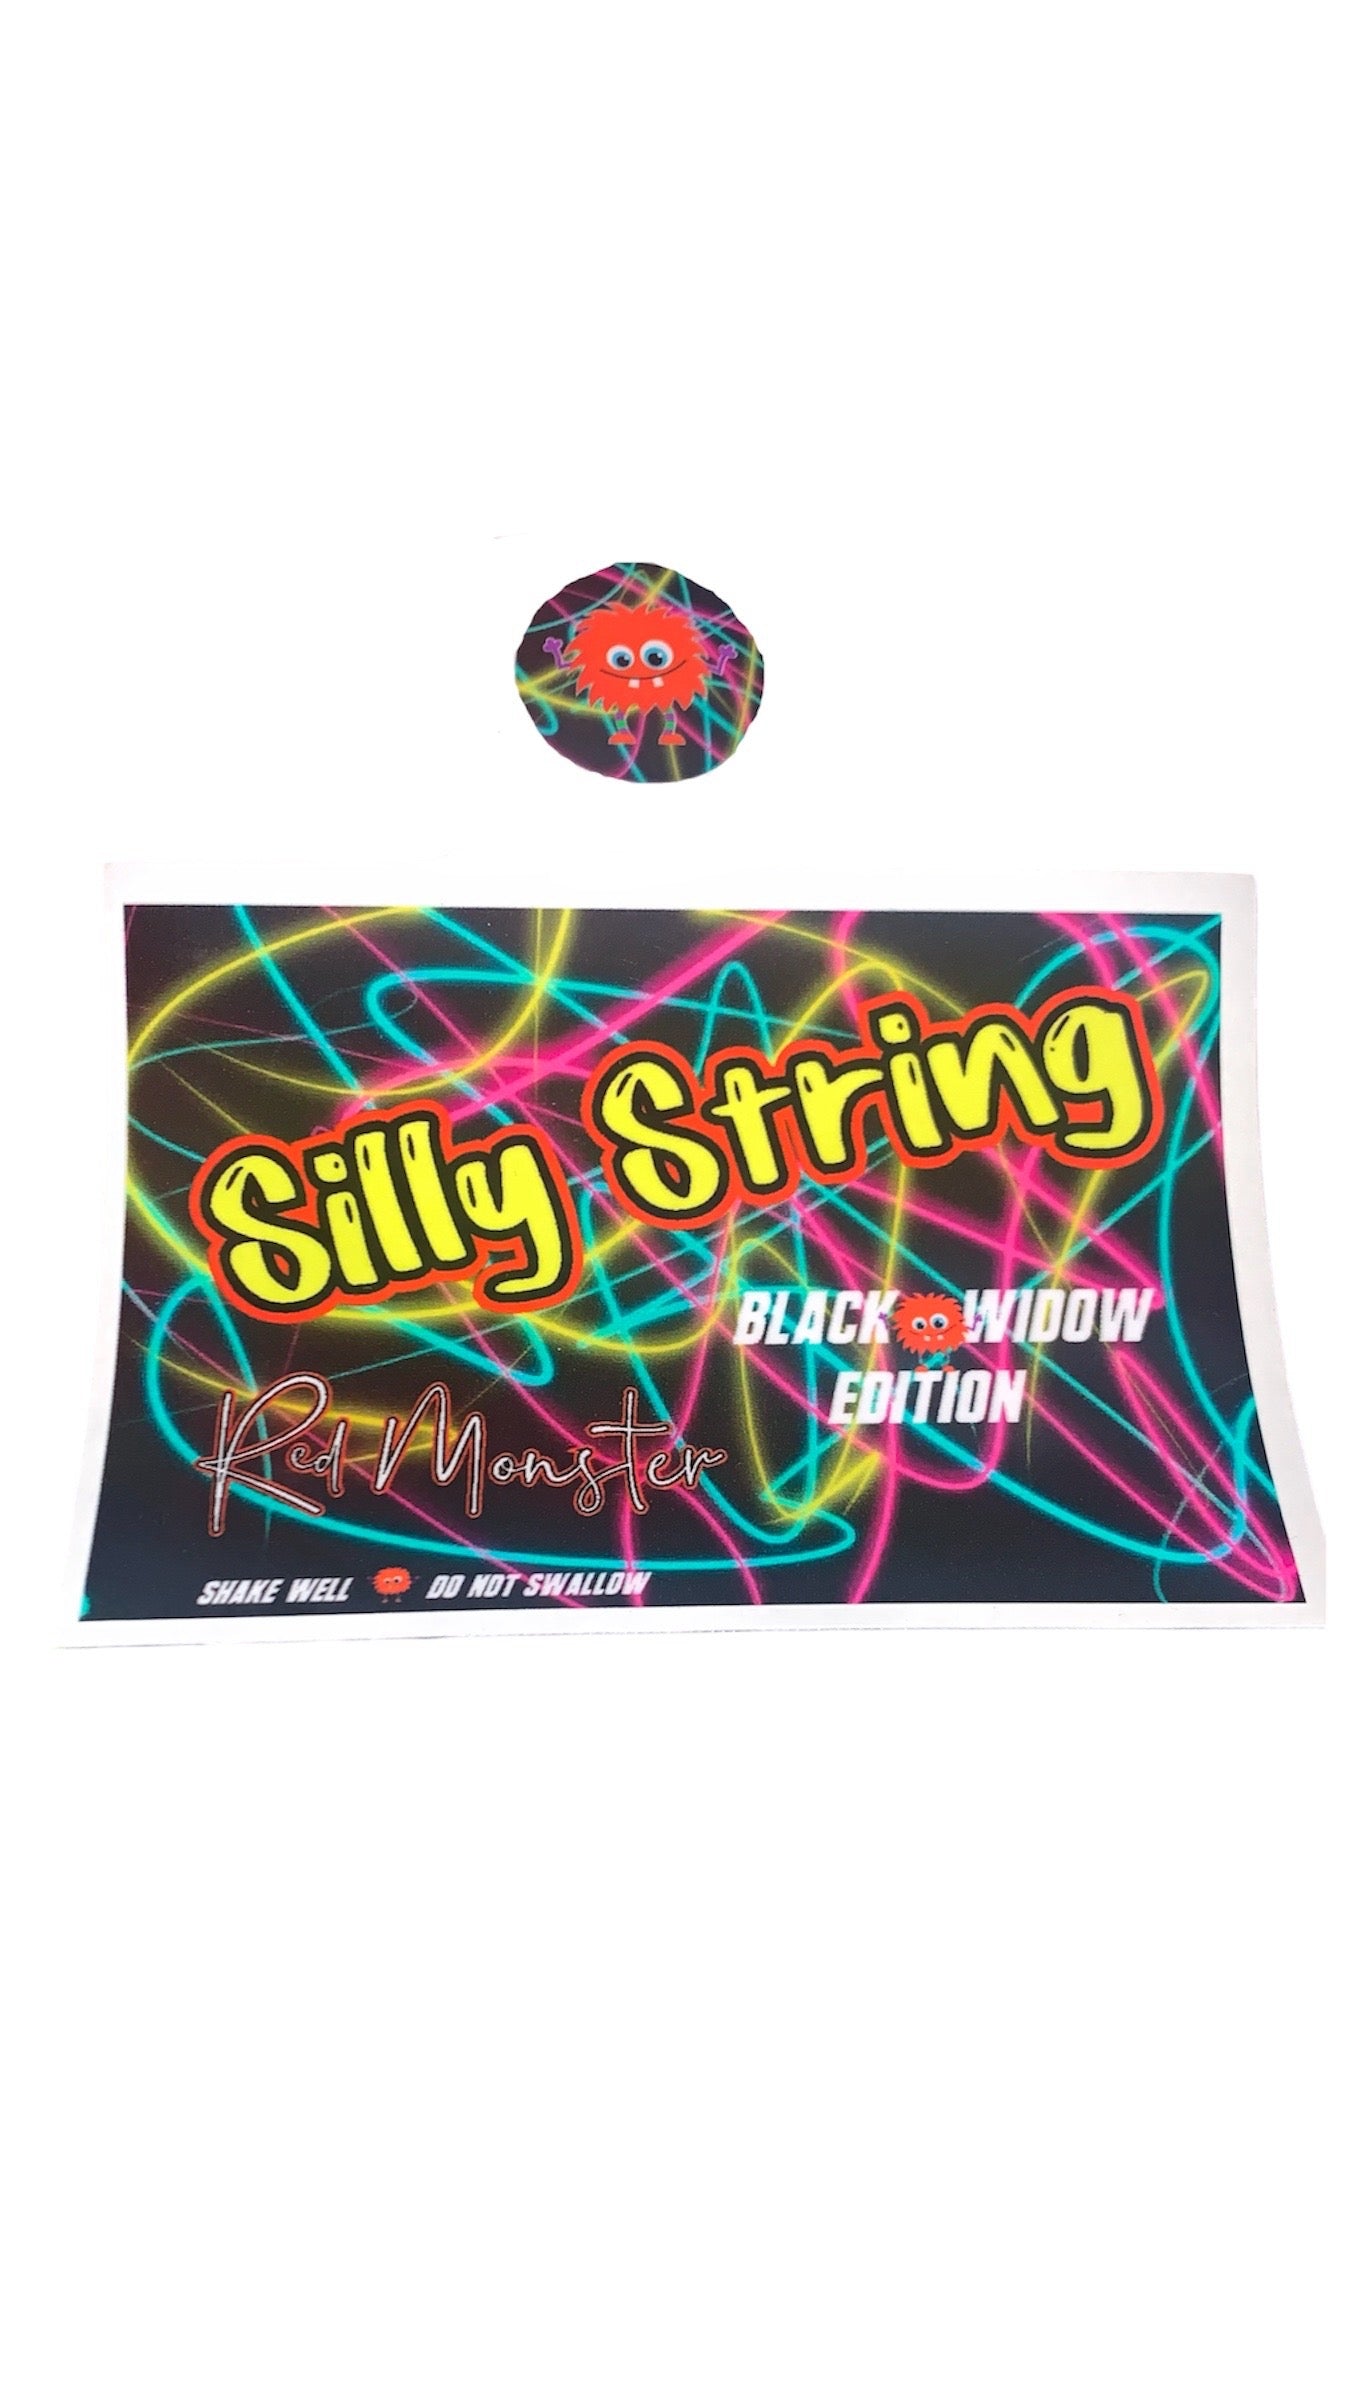 SILLY STRING BOTTLE LABEL AND CAP LABEL (RM2056)